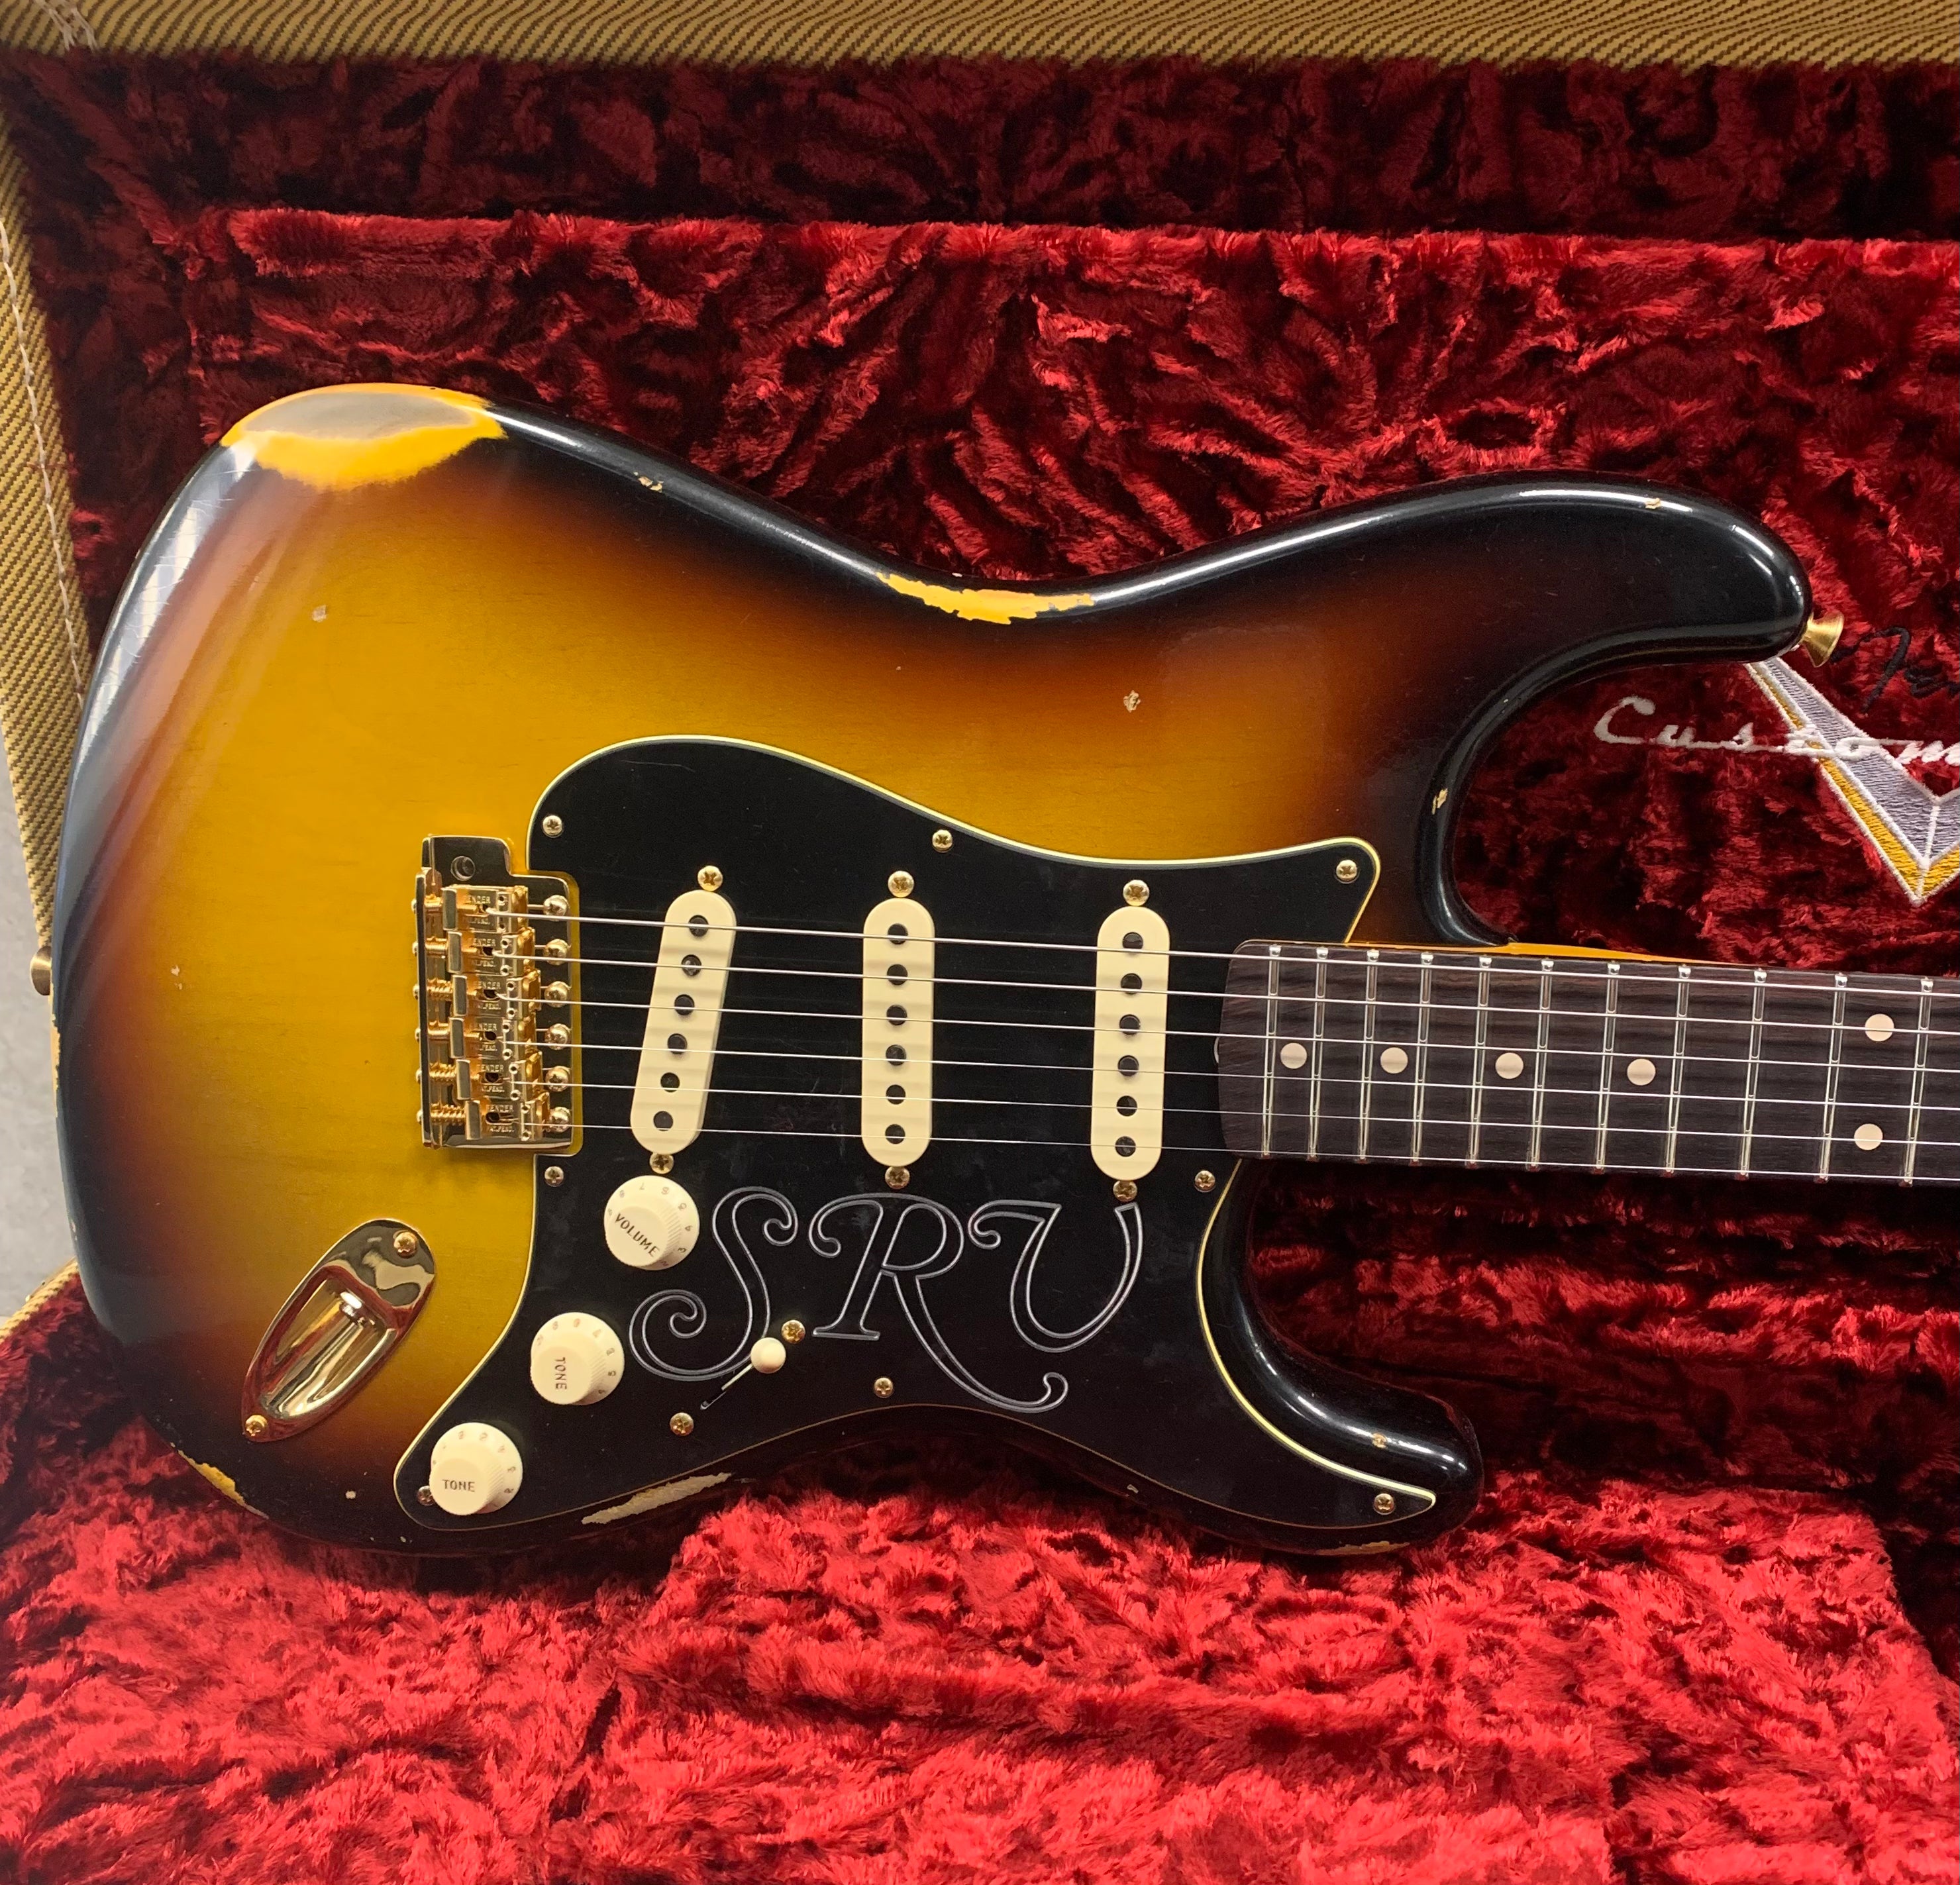 Fender Custom Shop SRV Stevie Ray Vaughan Signature Stratocaster Relic with Closet Classic Hardware, Rosewood Fingerboard, Faded 3-Color Sunburst 9235001087